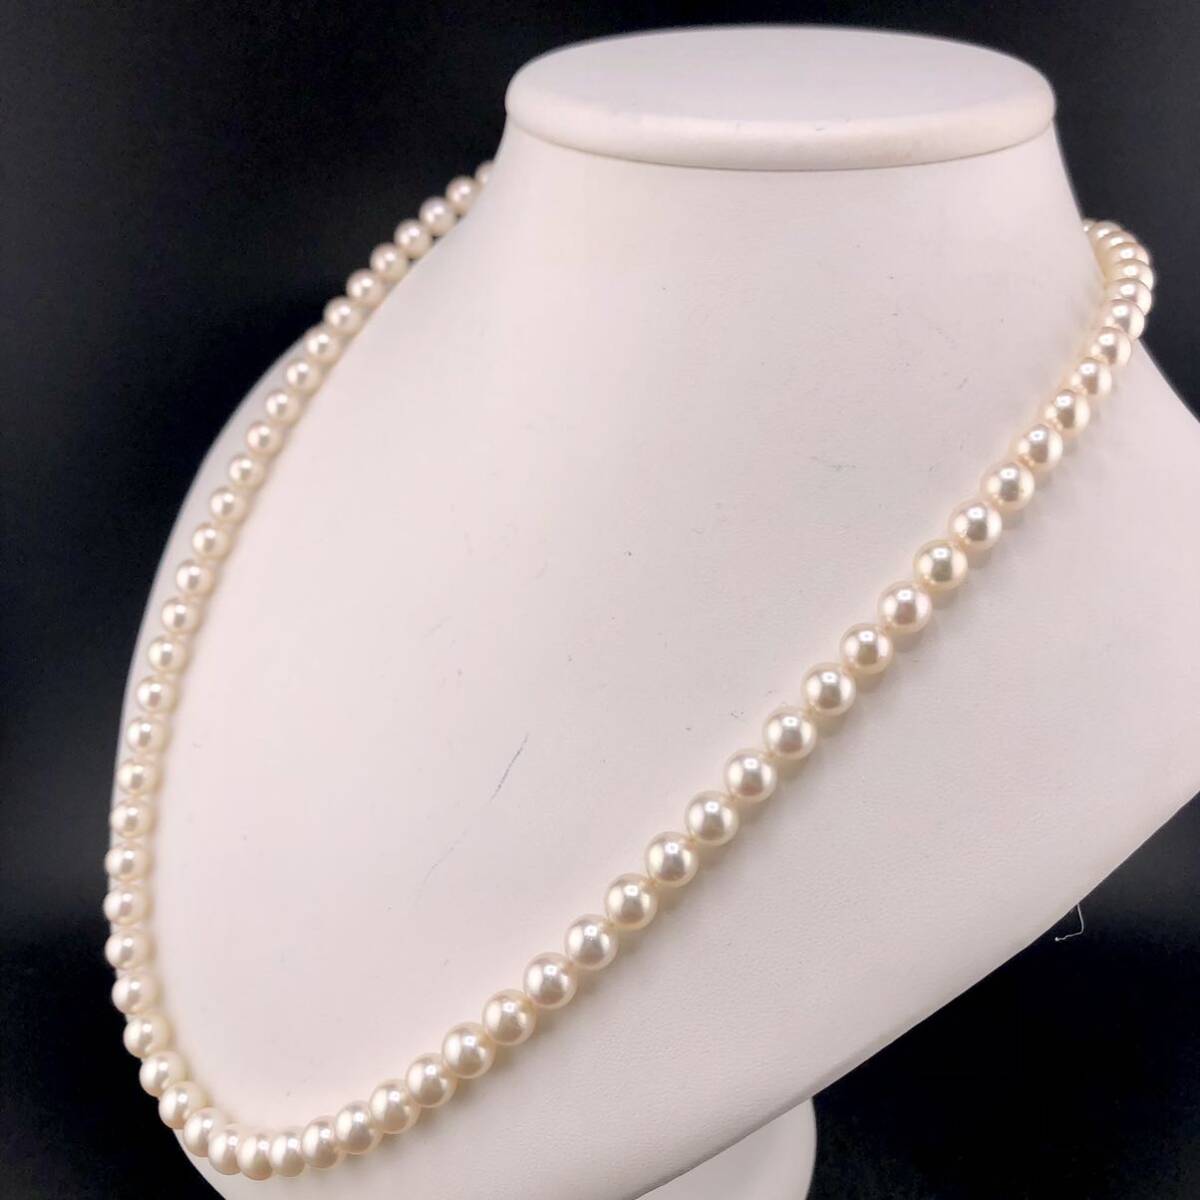 E05-5188☆☆ アコヤパールネックレス 7.0mm~7.5mm 58cm 44.9g ( アコヤ真珠 Pearl necklace SILVER )_画像2